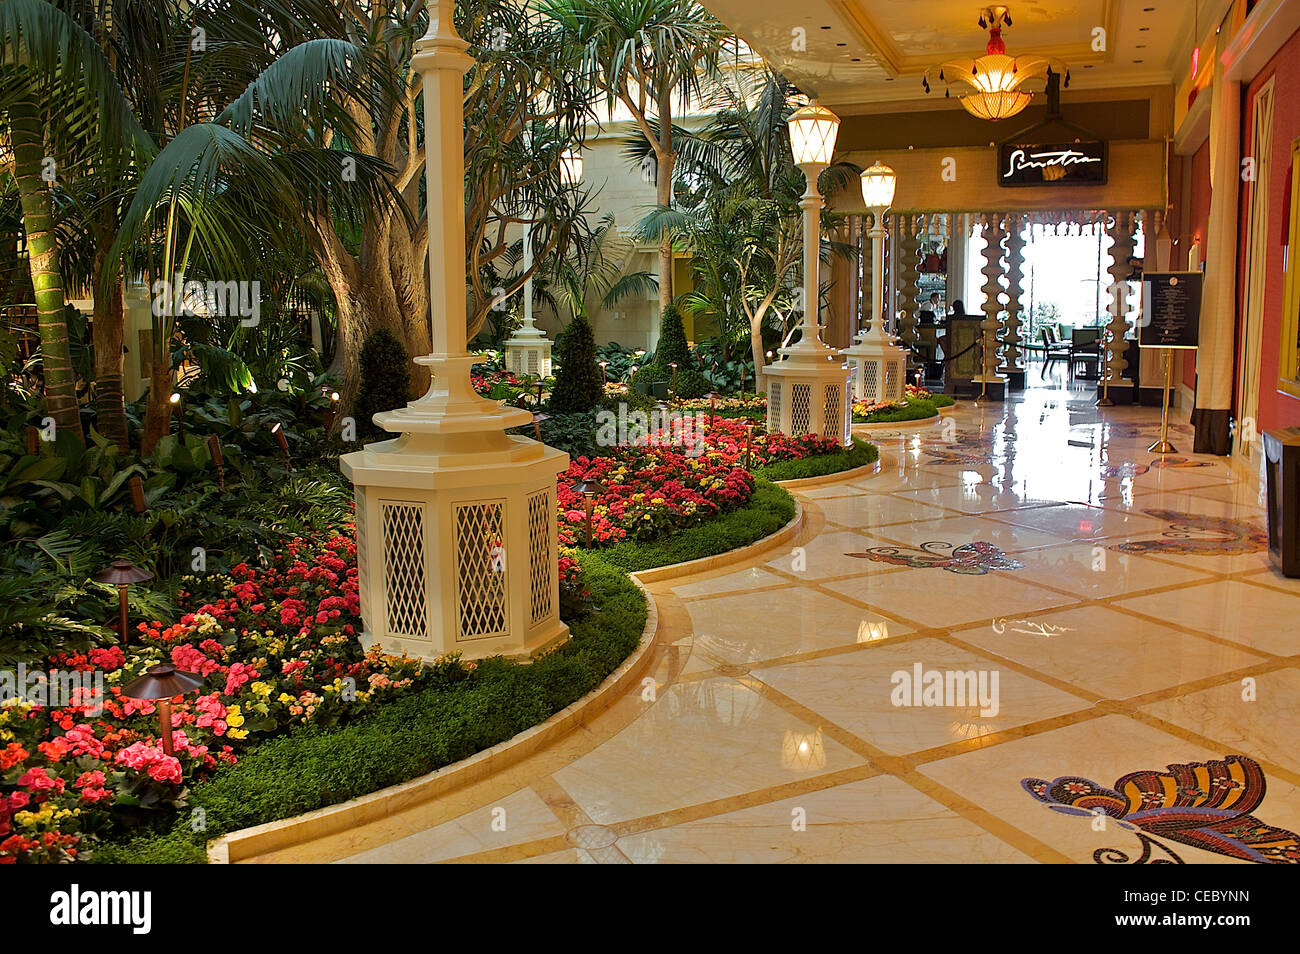 Looking towards the entrance to Sinatra restaurant in the Encore hotel and  casino, Las Vegas, Nevada, United States Stock Photo - Alamy